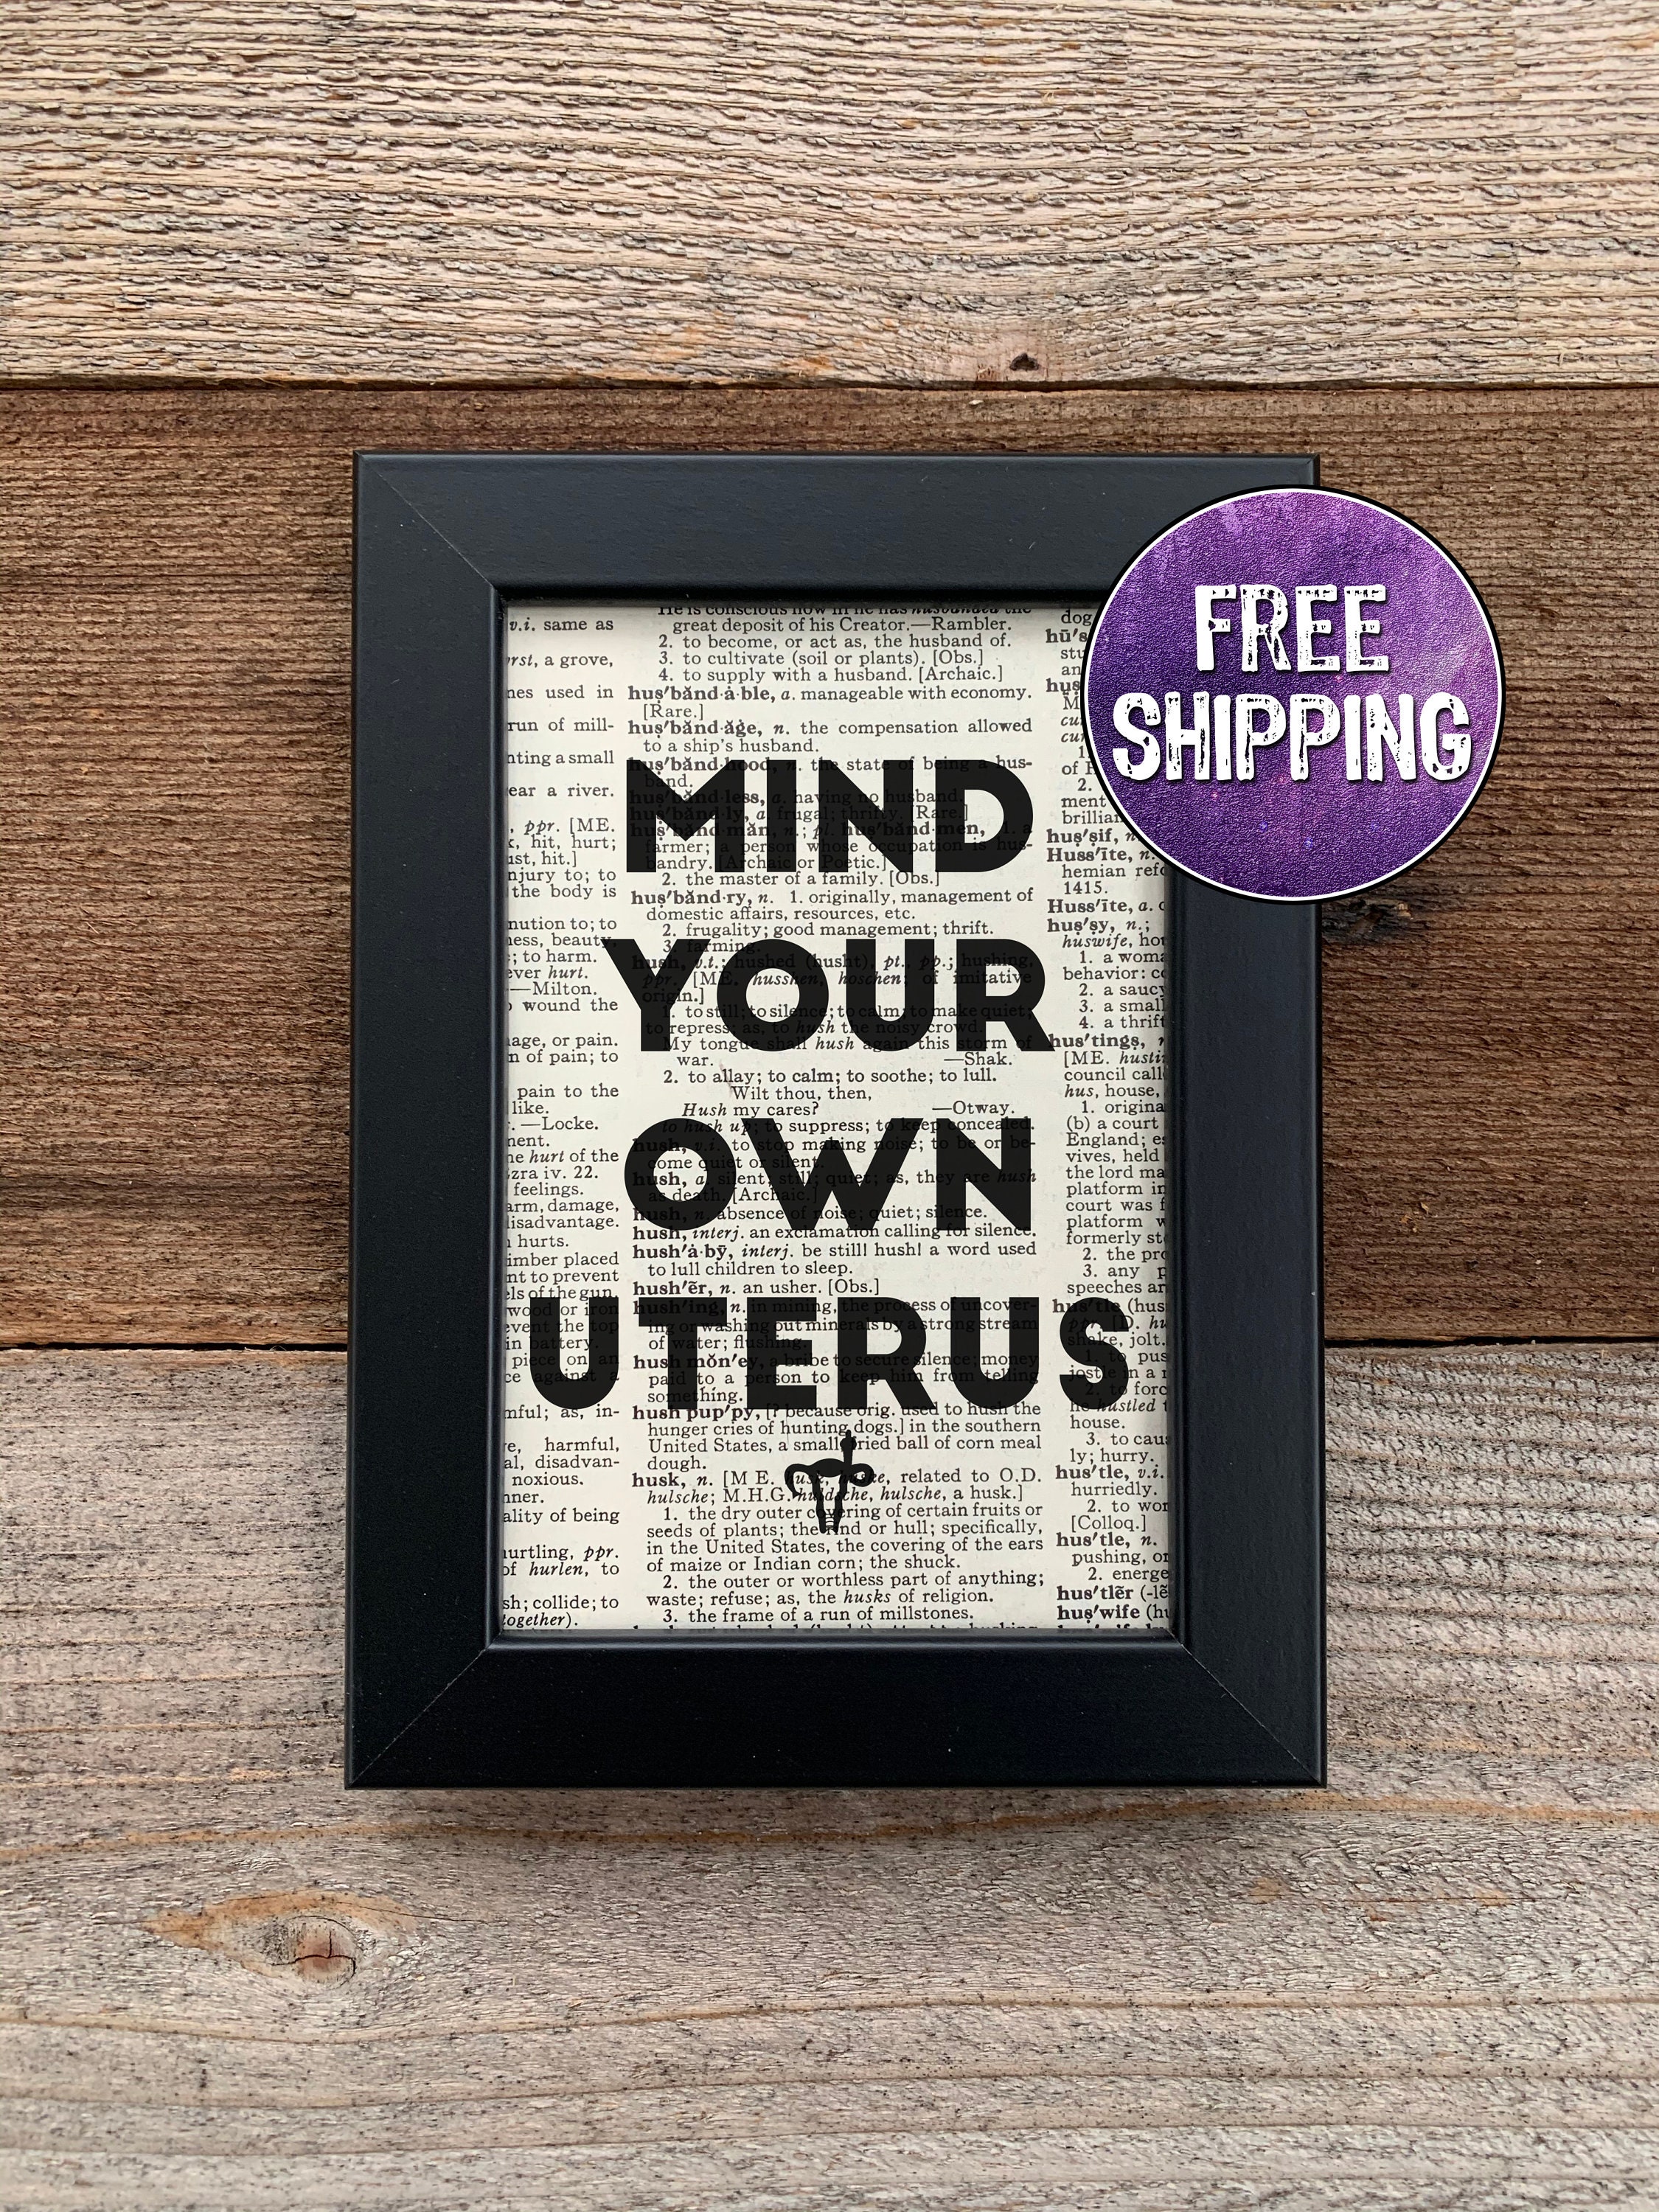 Framed Mind Your Own Uterus Vintage Dictionary Print, Dissent Art, SCOTUS, Liberal Poster Pro Choice Sign Protest Banner Women's Rights Sign